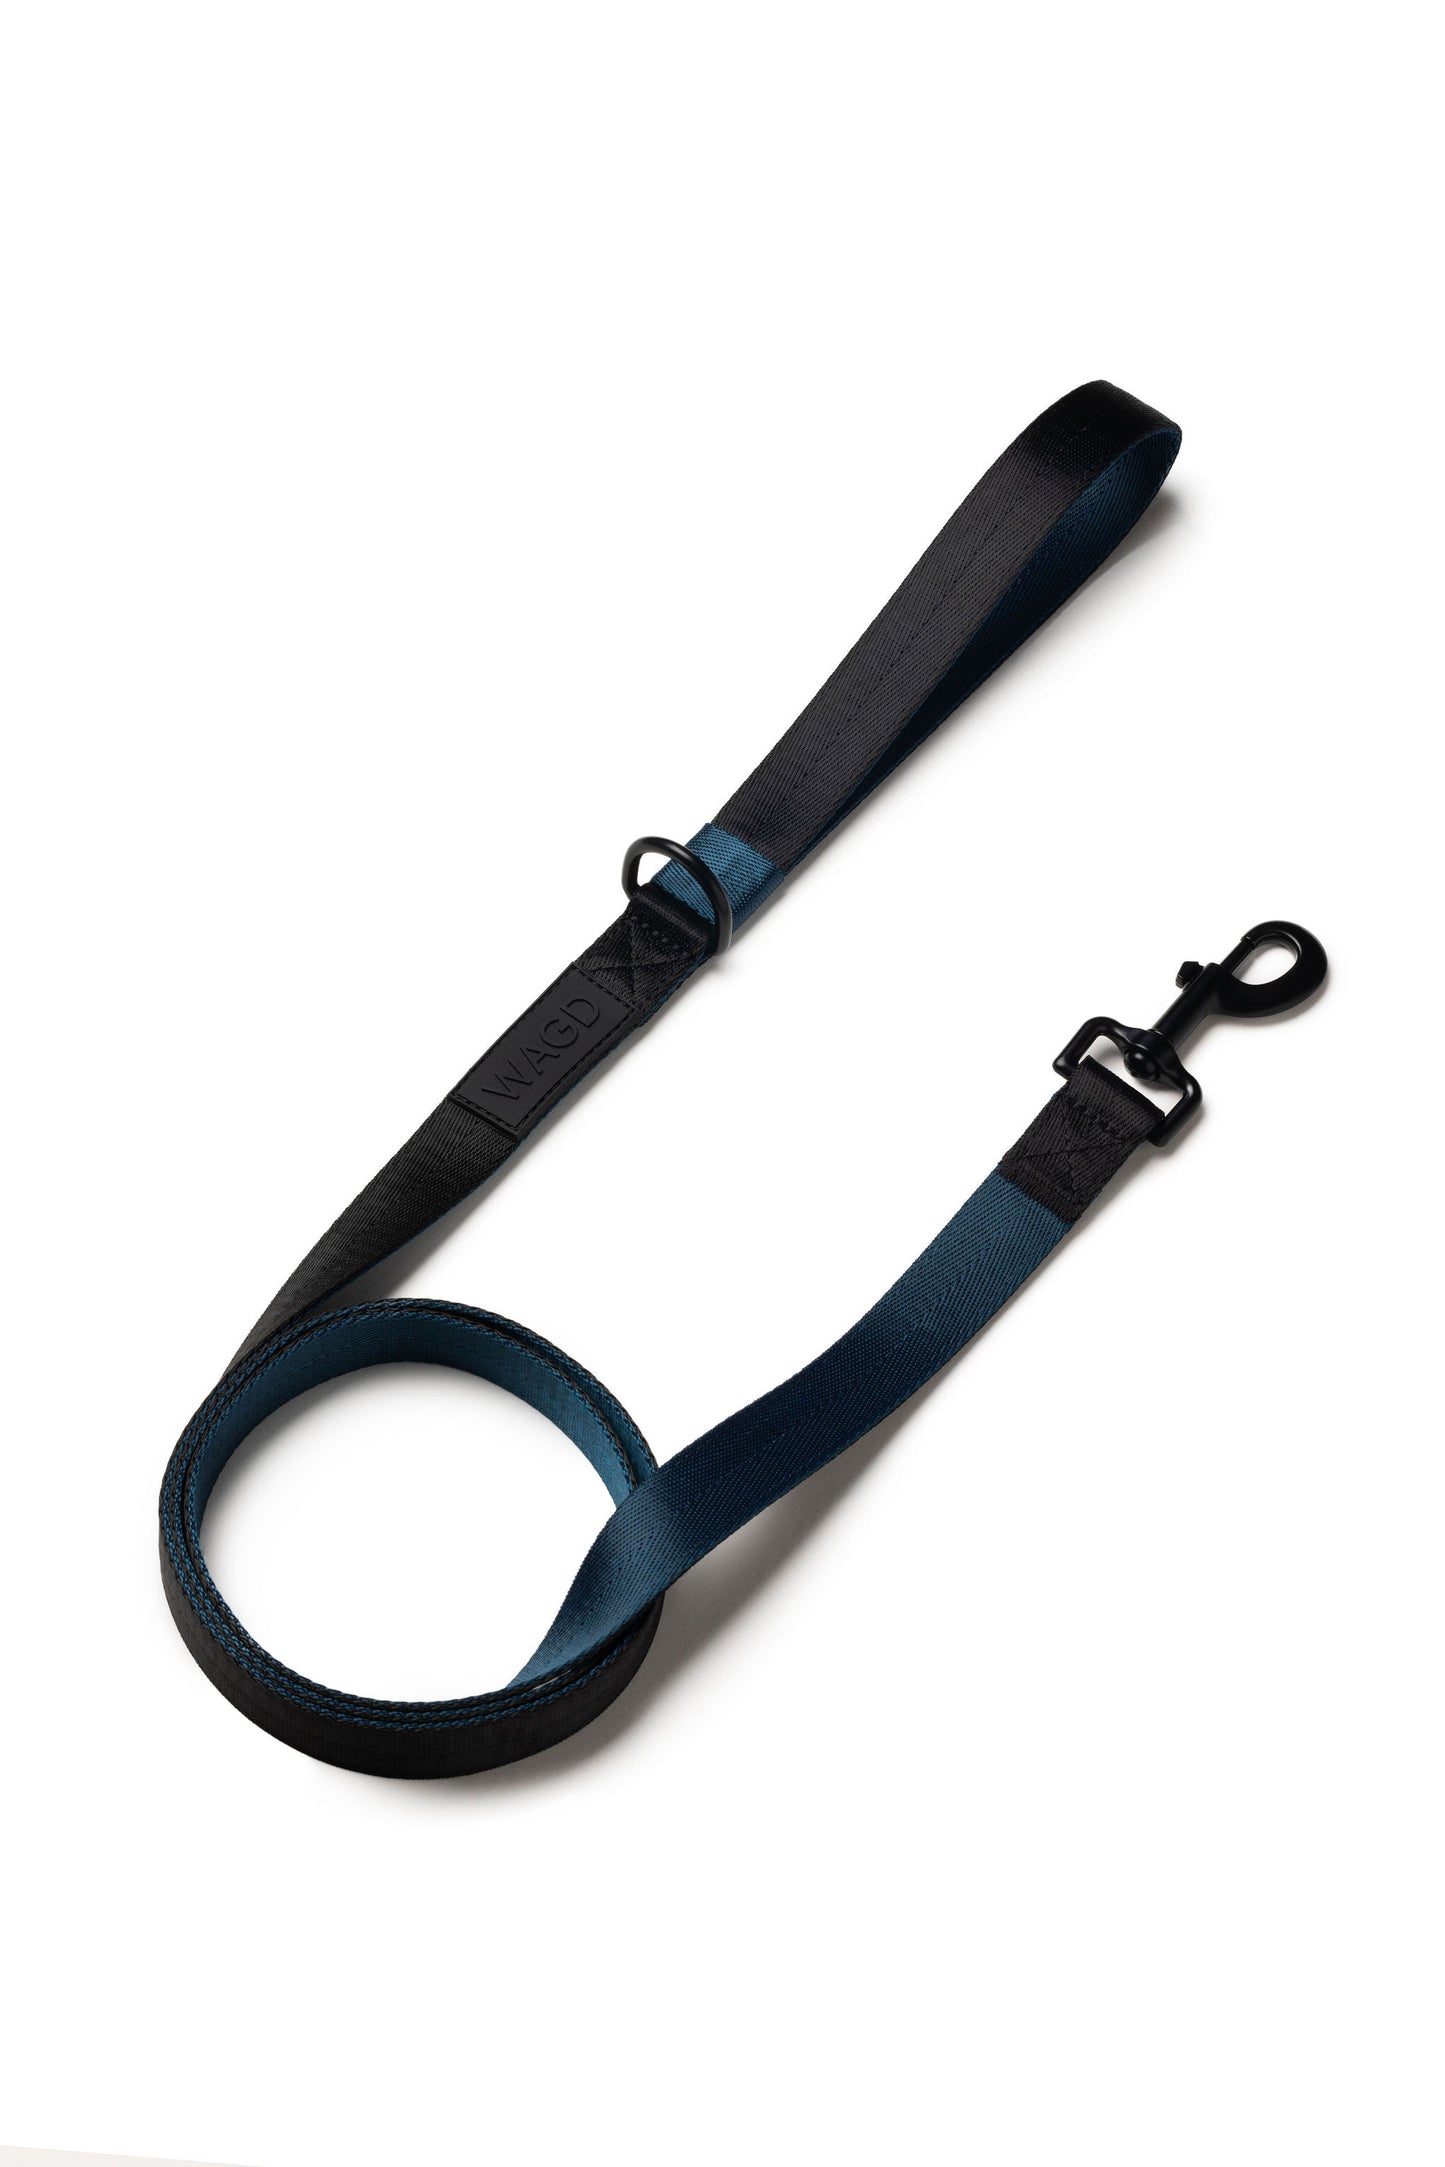 Dog lead in Peacock and black with black clip and black rubber logo below handle.